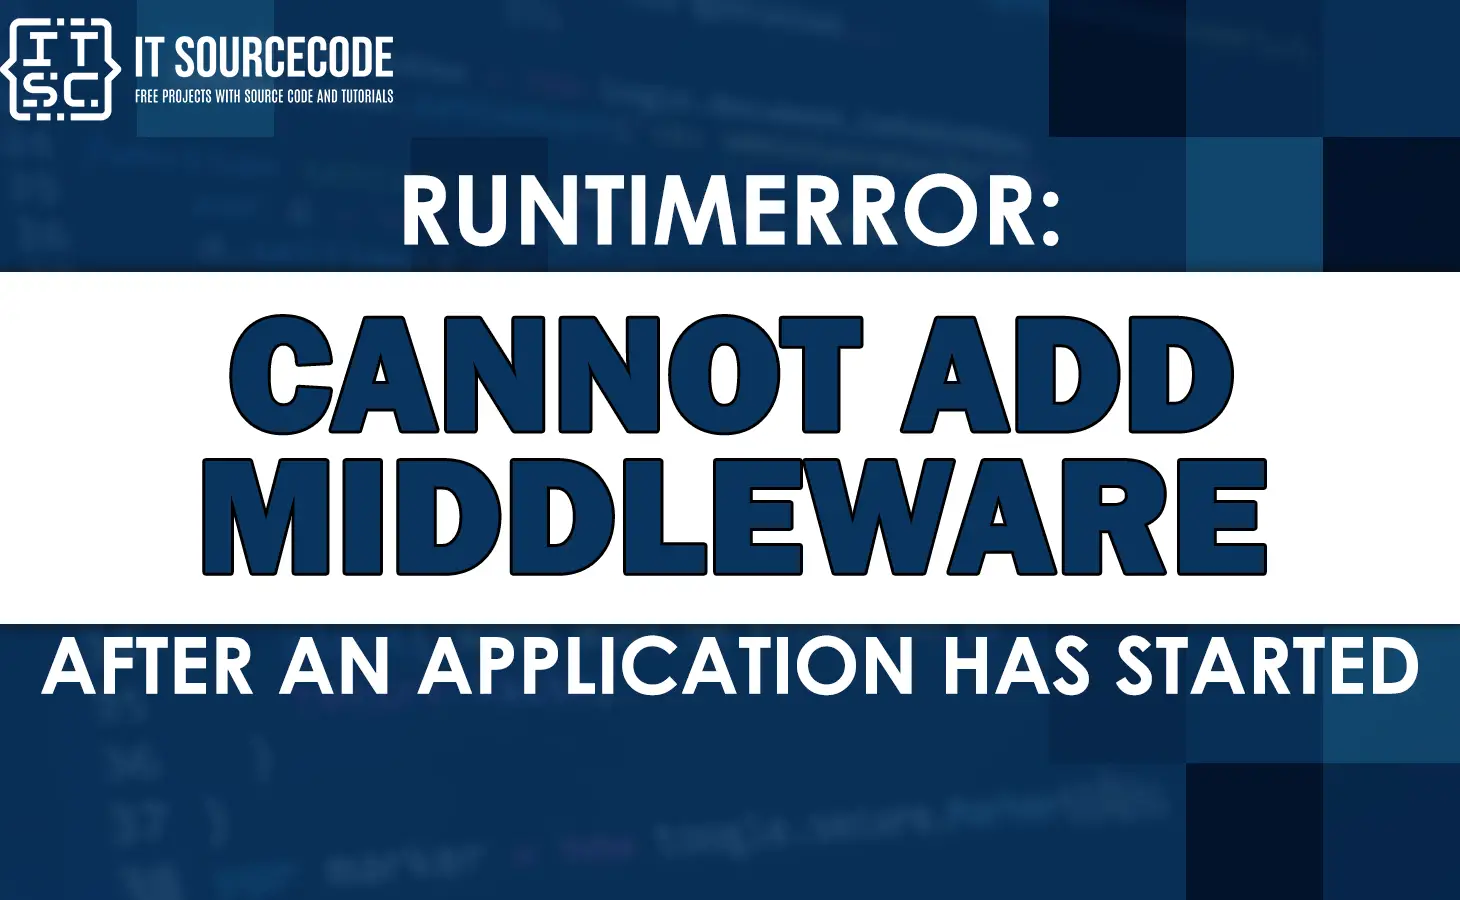 runtimeerror cannot add middleware after an application has started